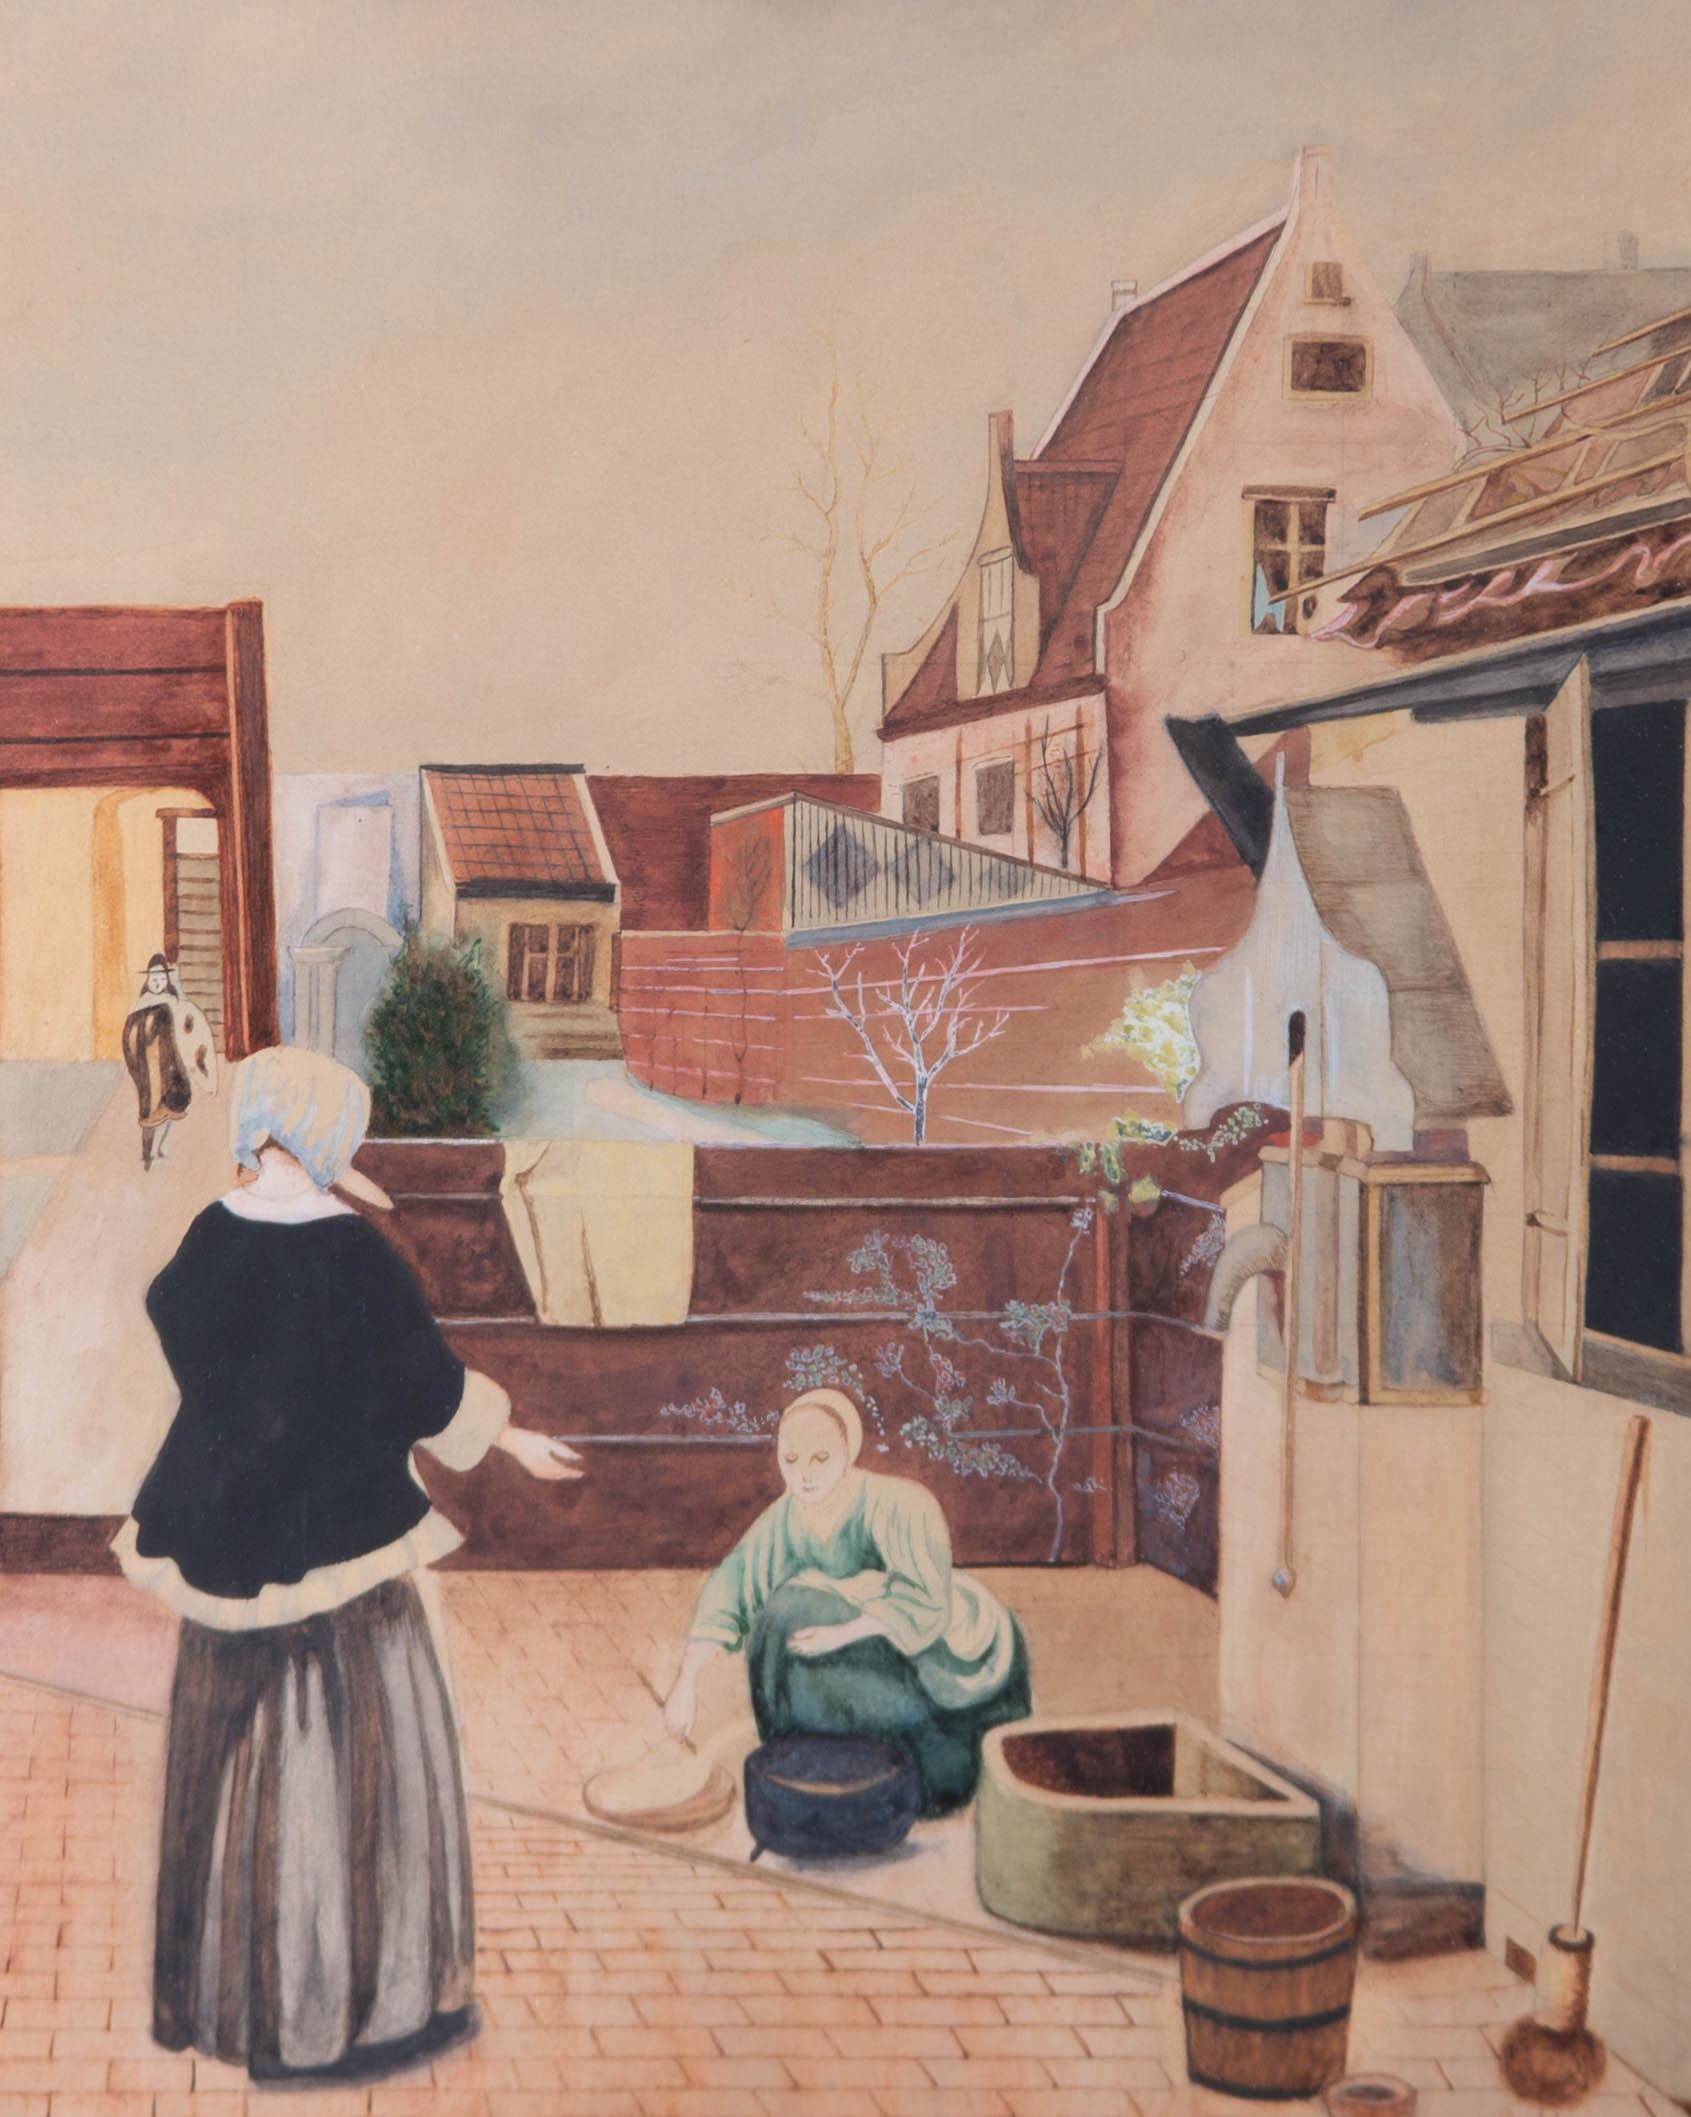 Maids work in a courtyard as a gentleman approaches. This fine watercolour has been neatly completed with a sepia, autumnal palette, giving the artwork a charming wintery ambiance.

The painting is signed and dated in the bottom left-hand corner and